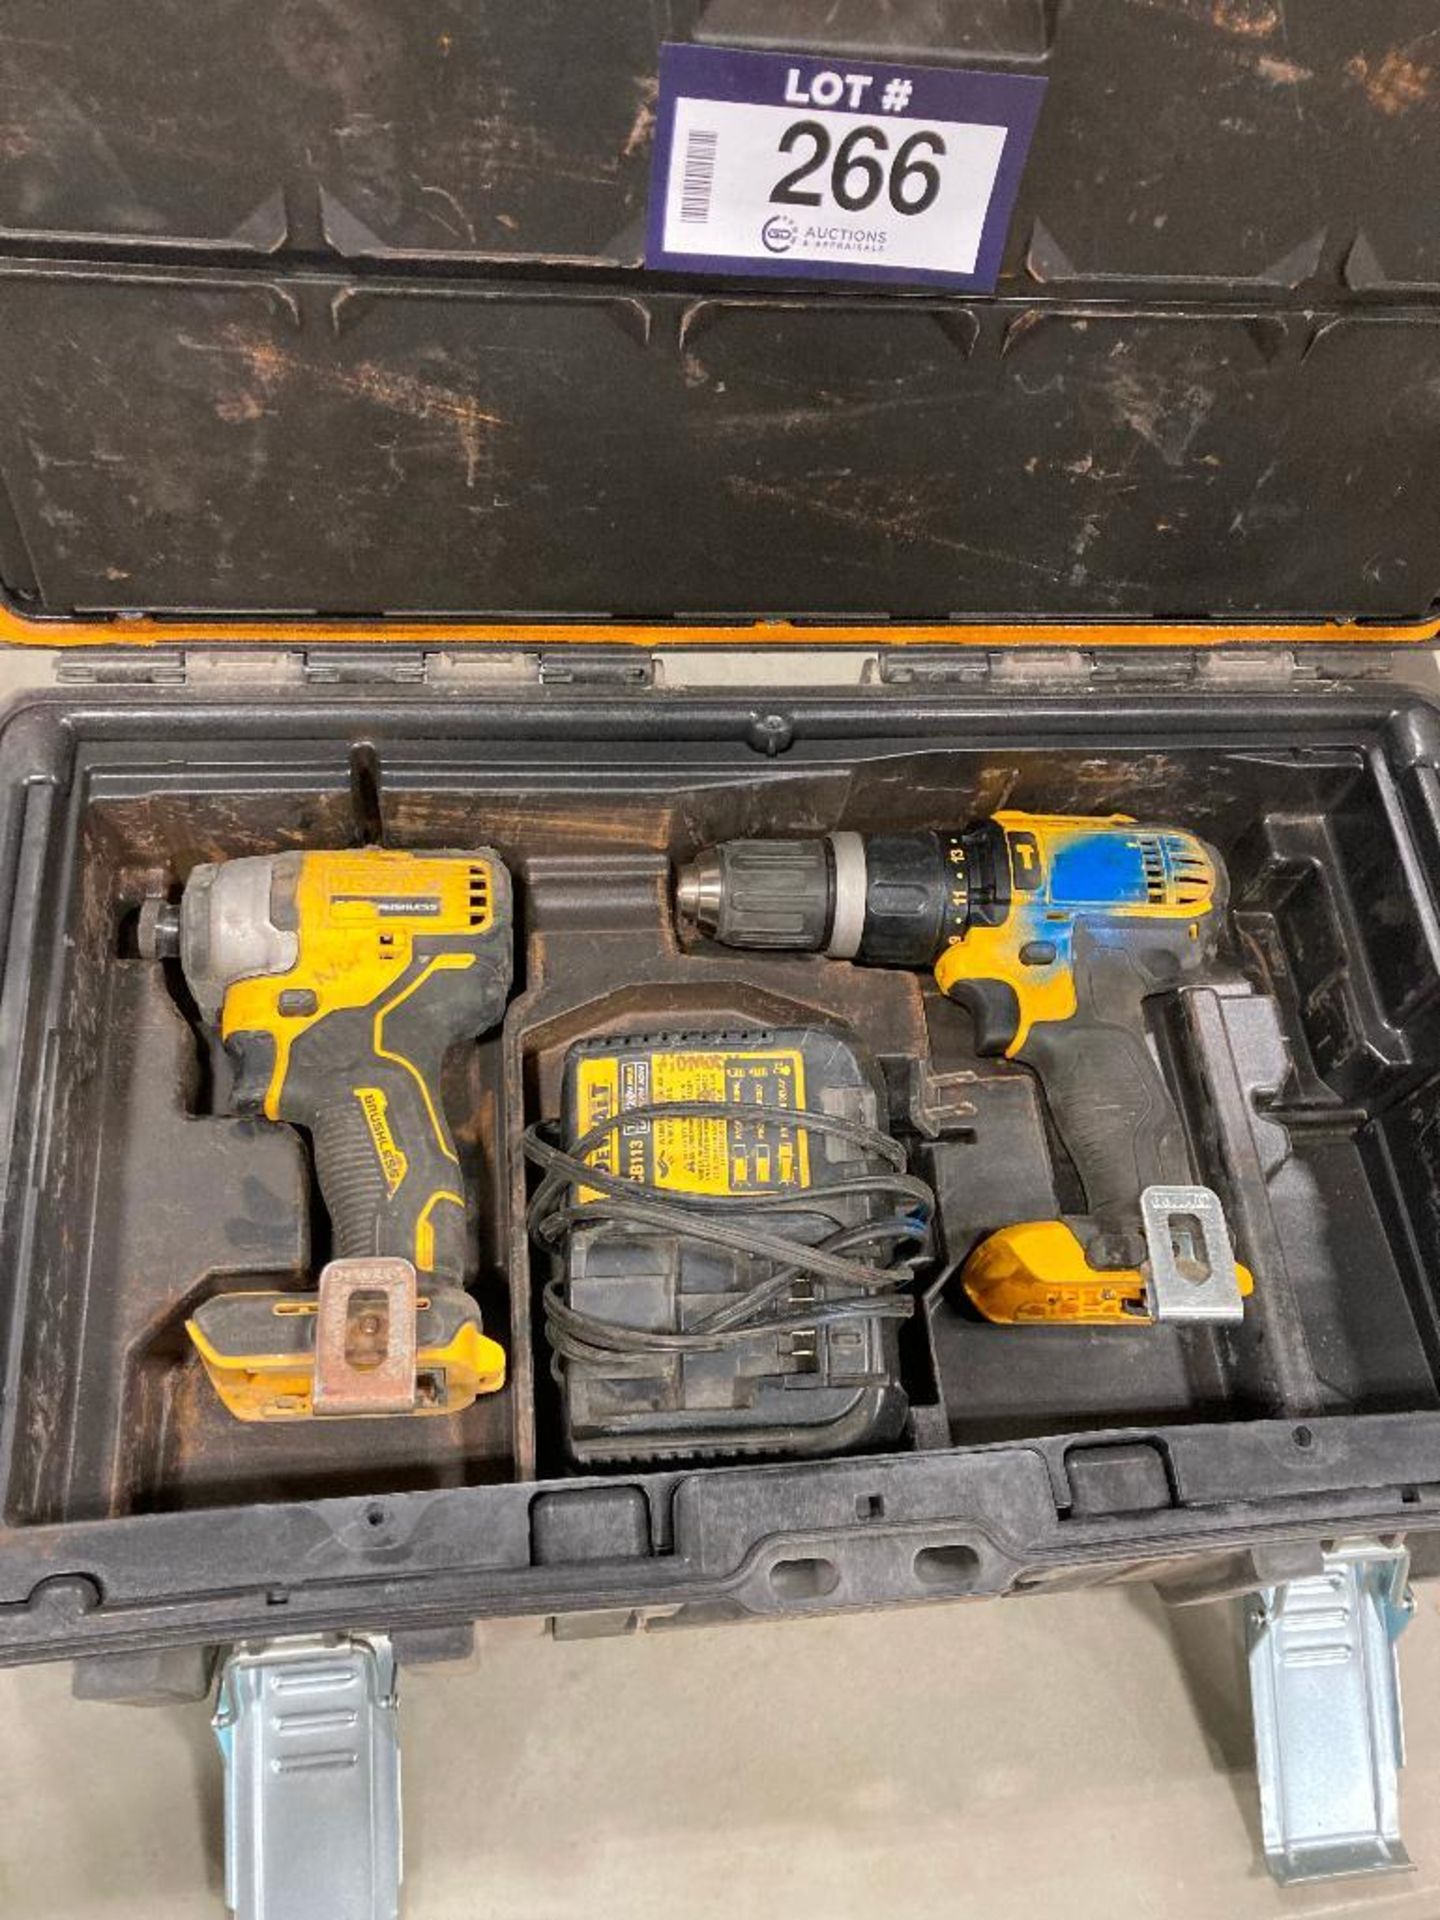 DeWalt Toolbox Including: (1) 1/2" Hammer Drill, (1) 1/4" Impact Drill and (1) Battery Charger - Image 2 of 7